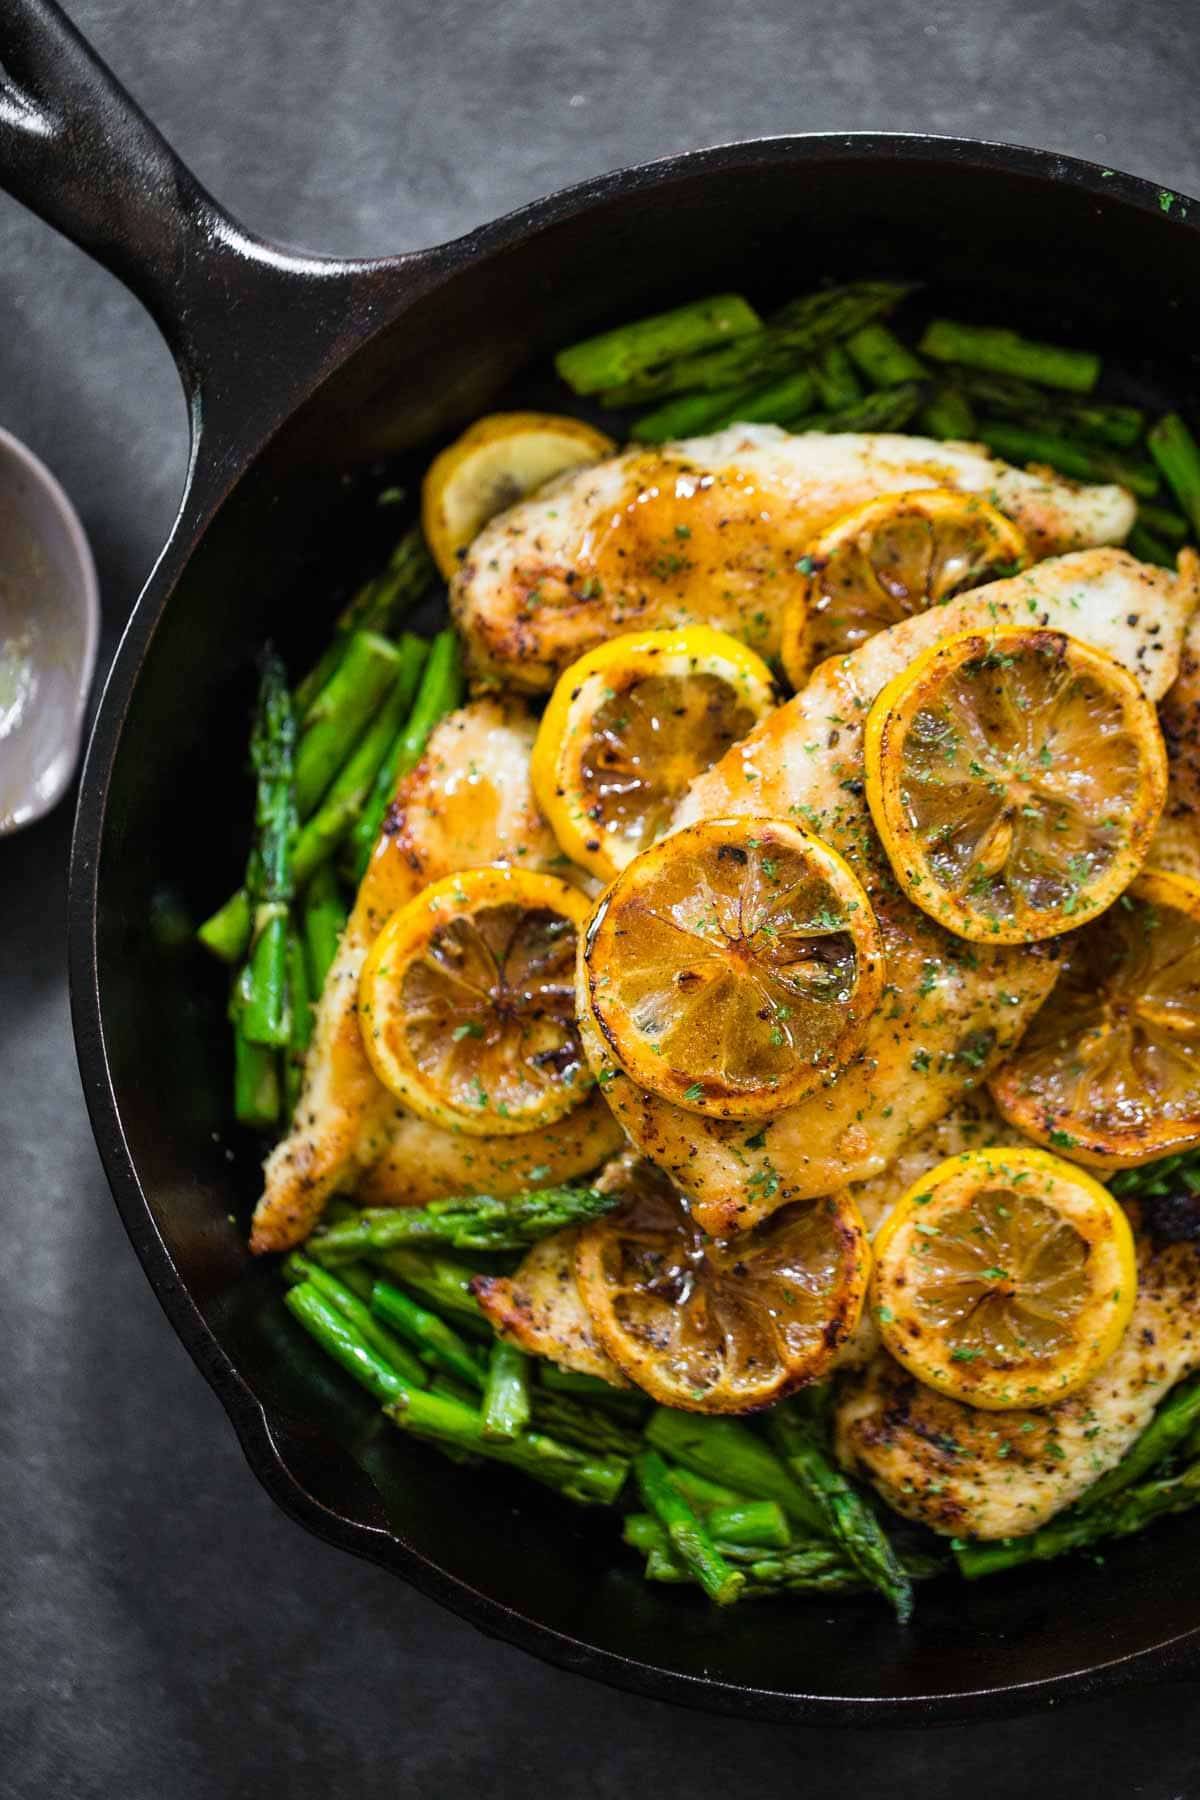 5 Ingredient Lemon Chicken with Asparagus - a bright, fresh, healthy recipe that's ready in 20 minutes! 300 calories. | pinchofyum.com